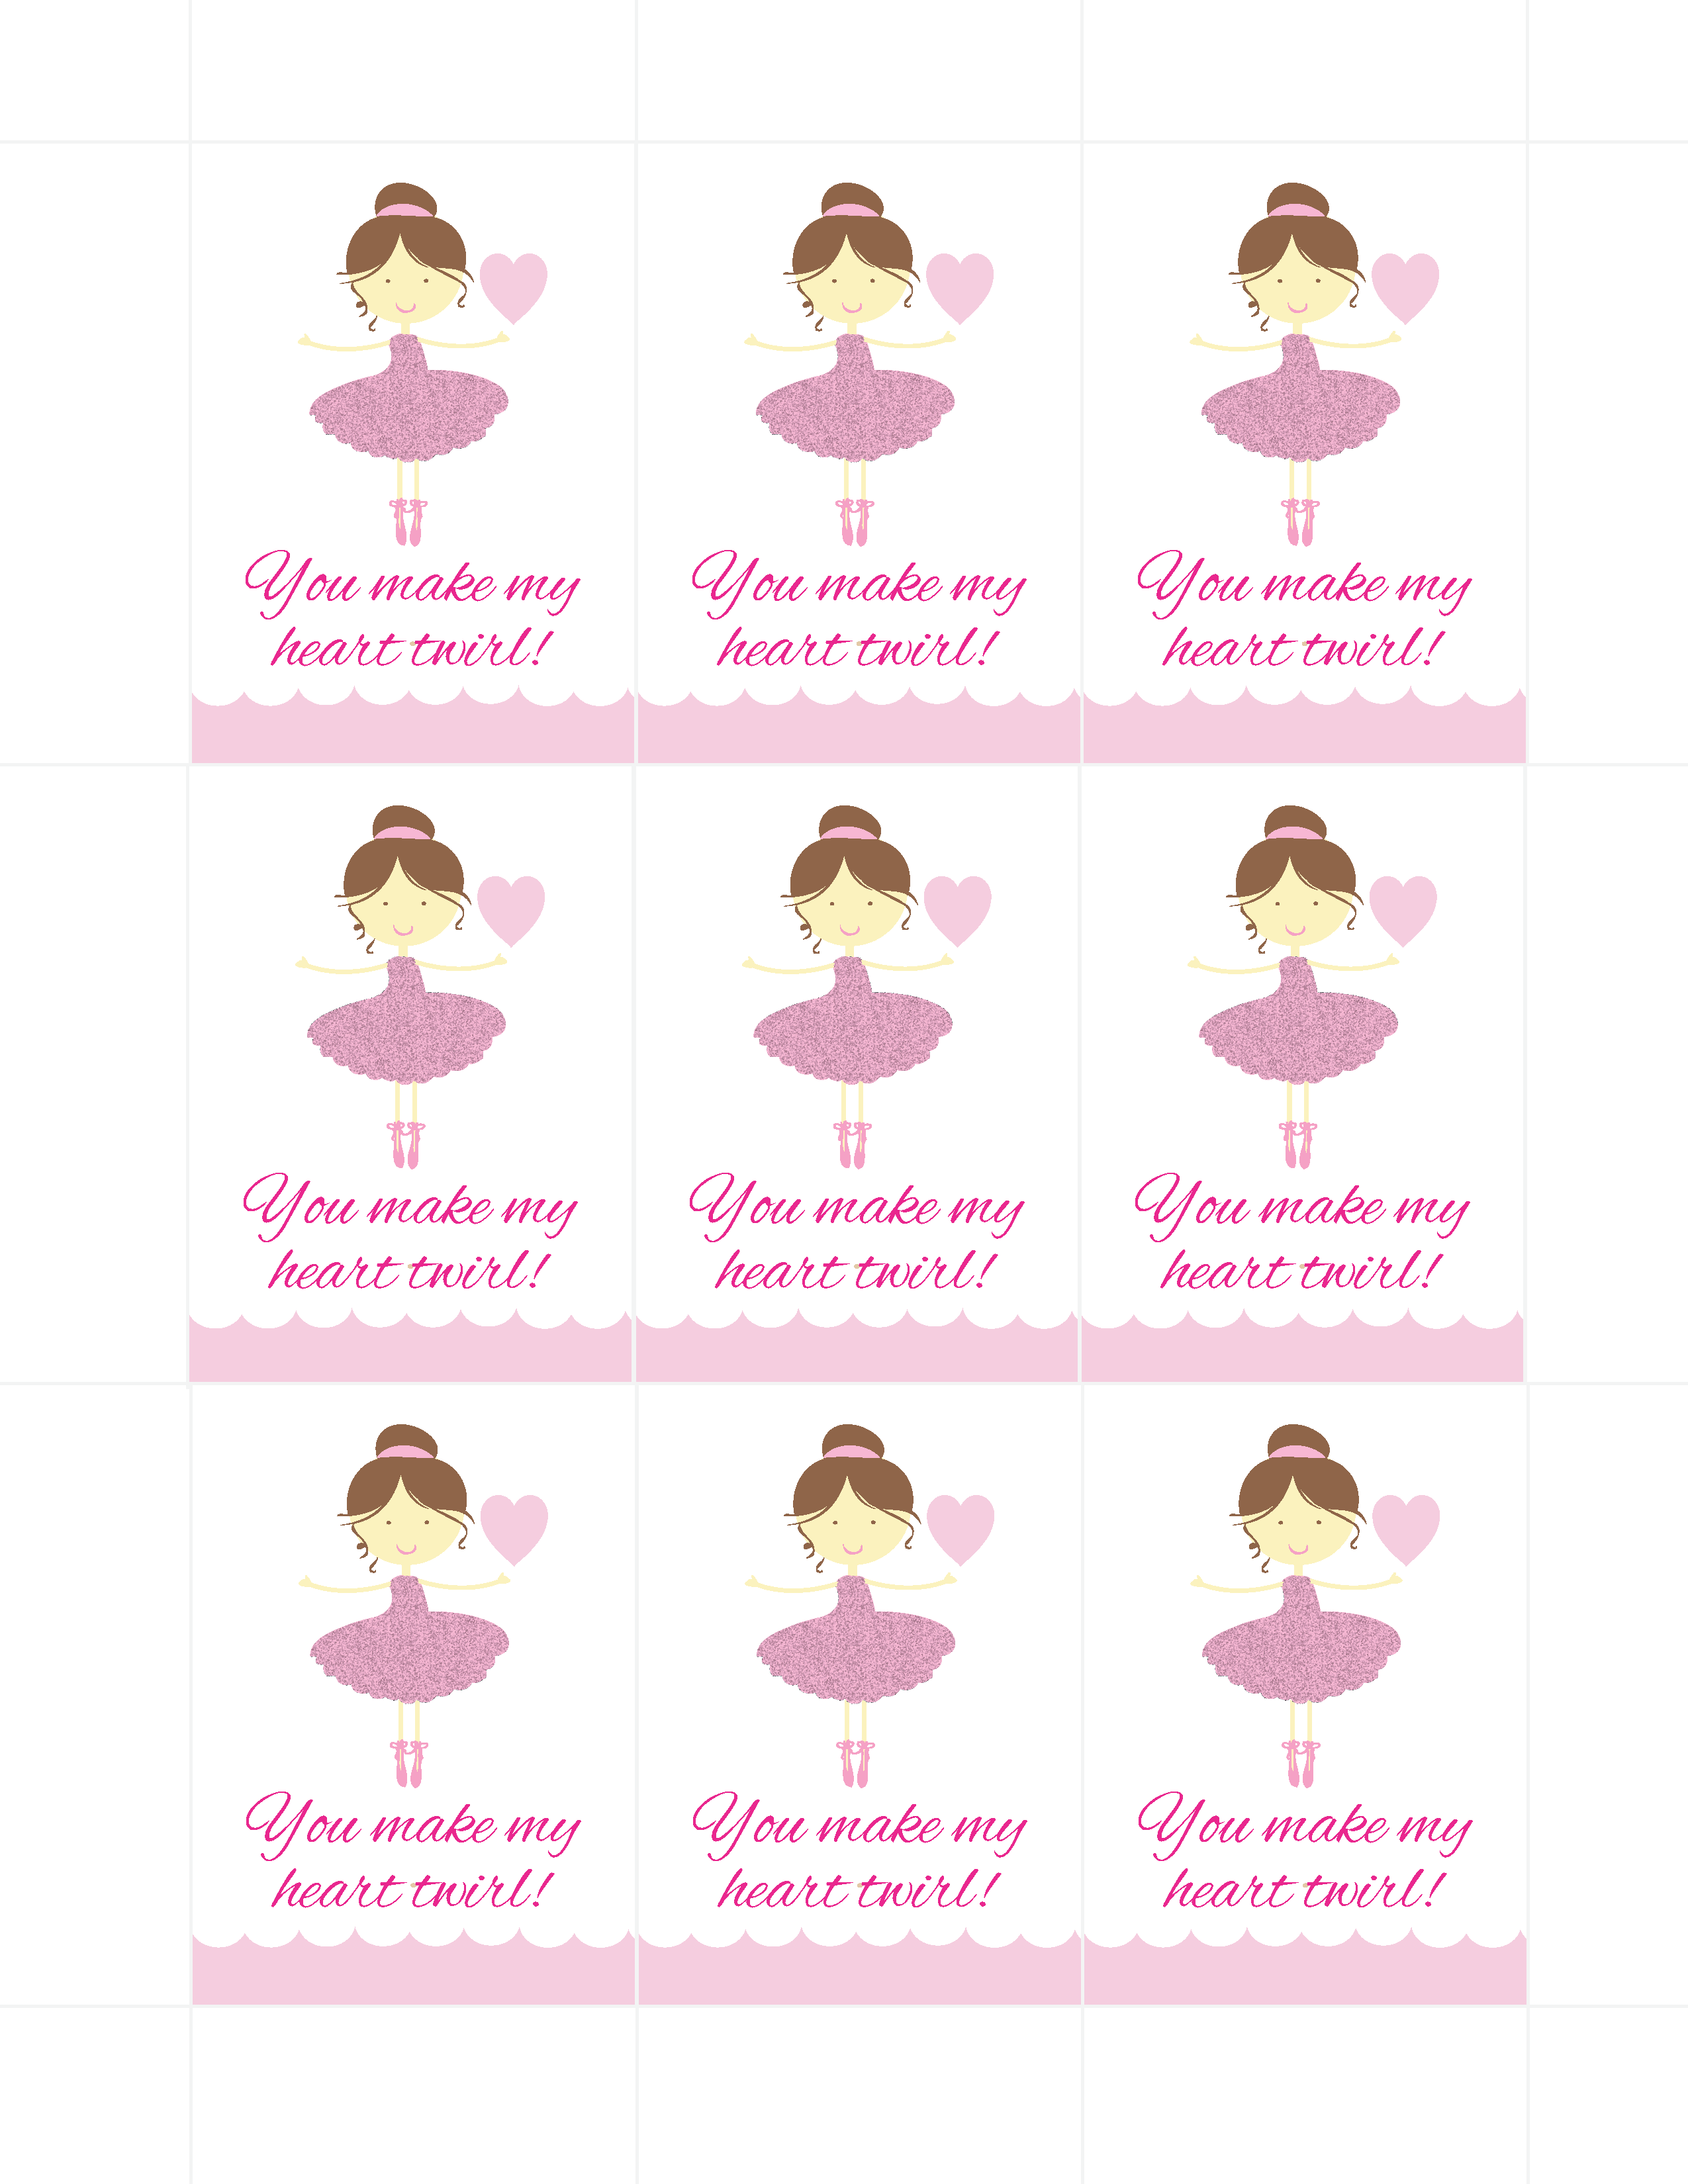 ballerina-party-ideas-free-printables-catch-my-party